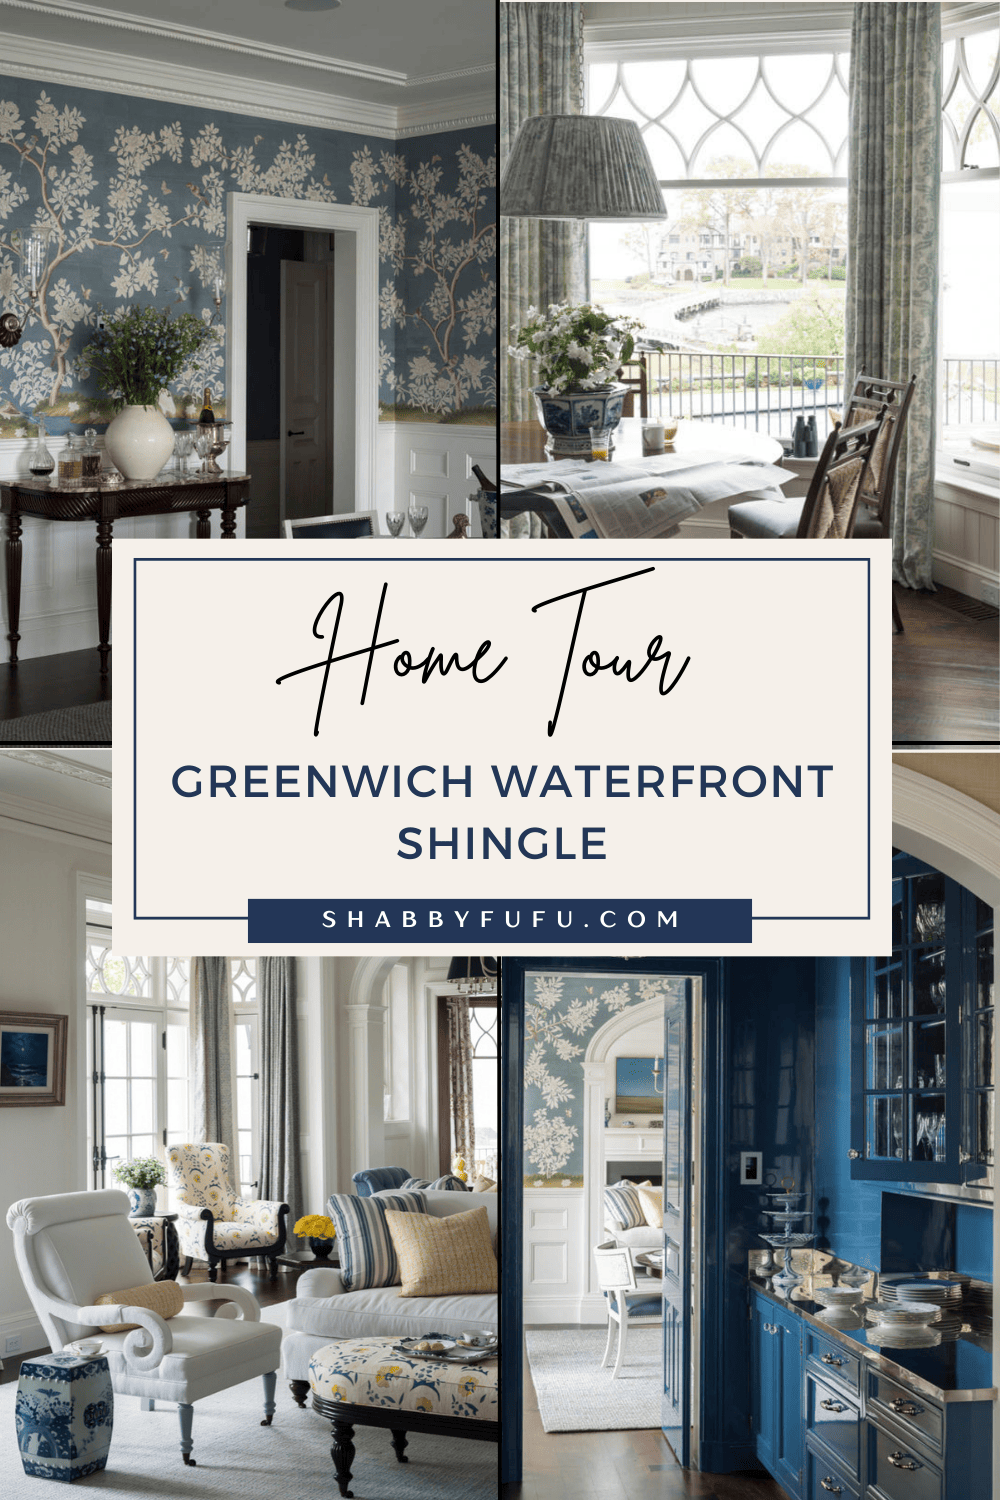 Pinterest decorative graphic featuring a collage of a home titled "Shingle-Inspired Home Tour Greenwich Waterfront"